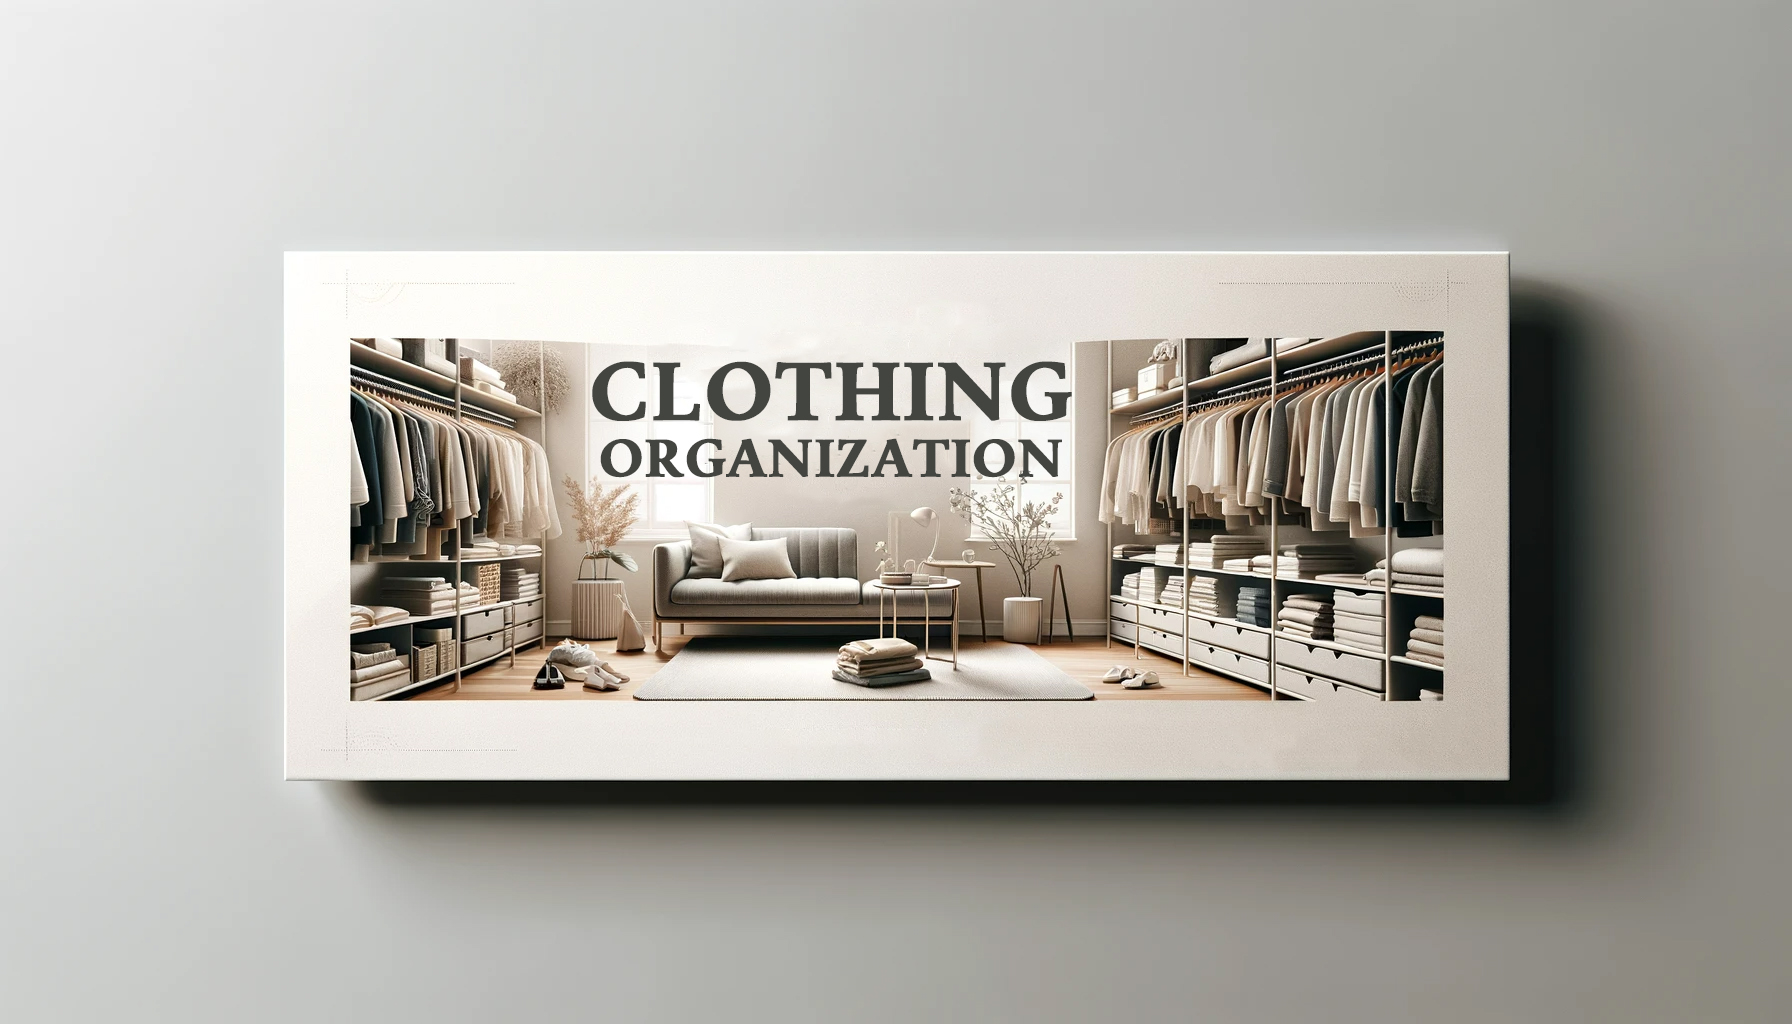 Transform your closet with our 'Clothing Organization - Simple and Elegant' solutions.